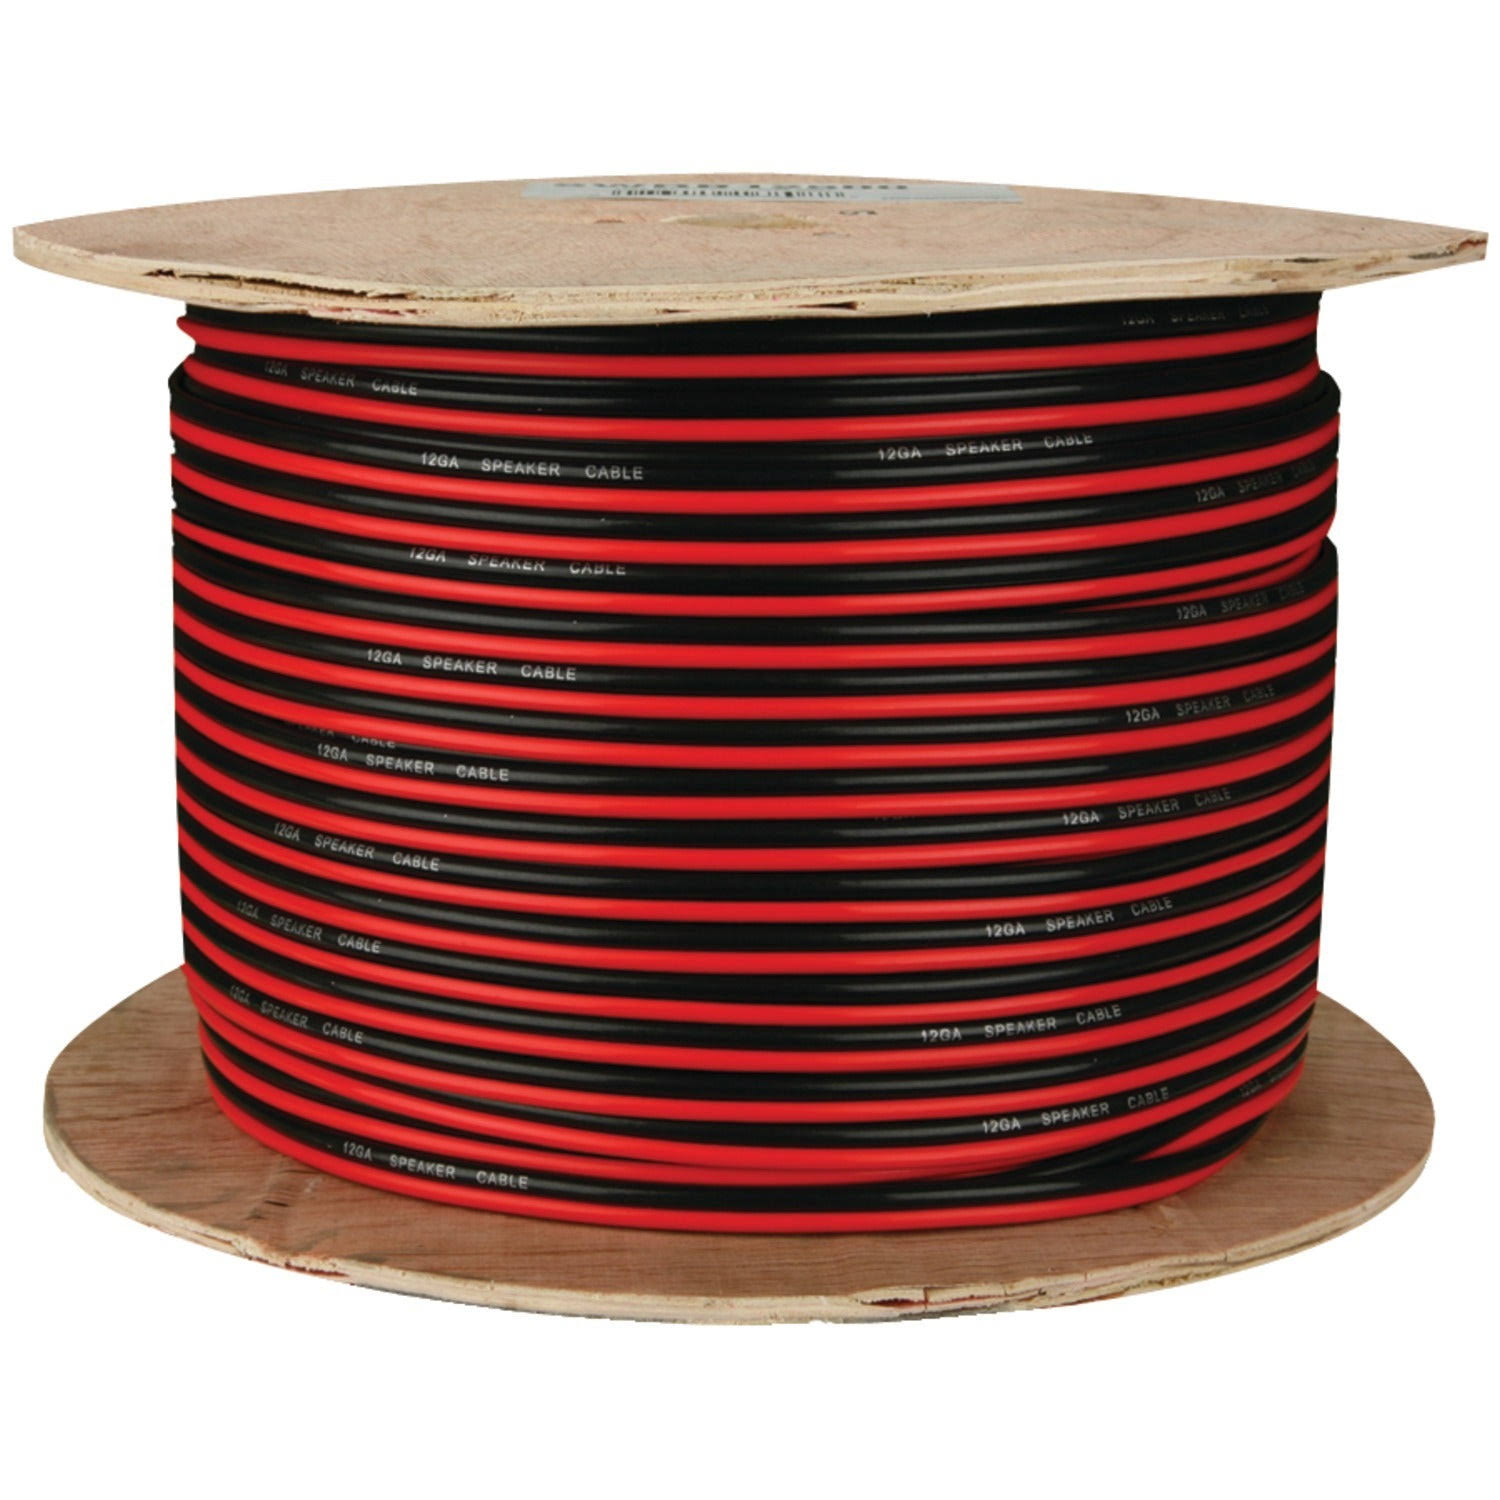 Install Bay Paired Primary Speaker Wires - 500', 16 Gauge, Black/Red